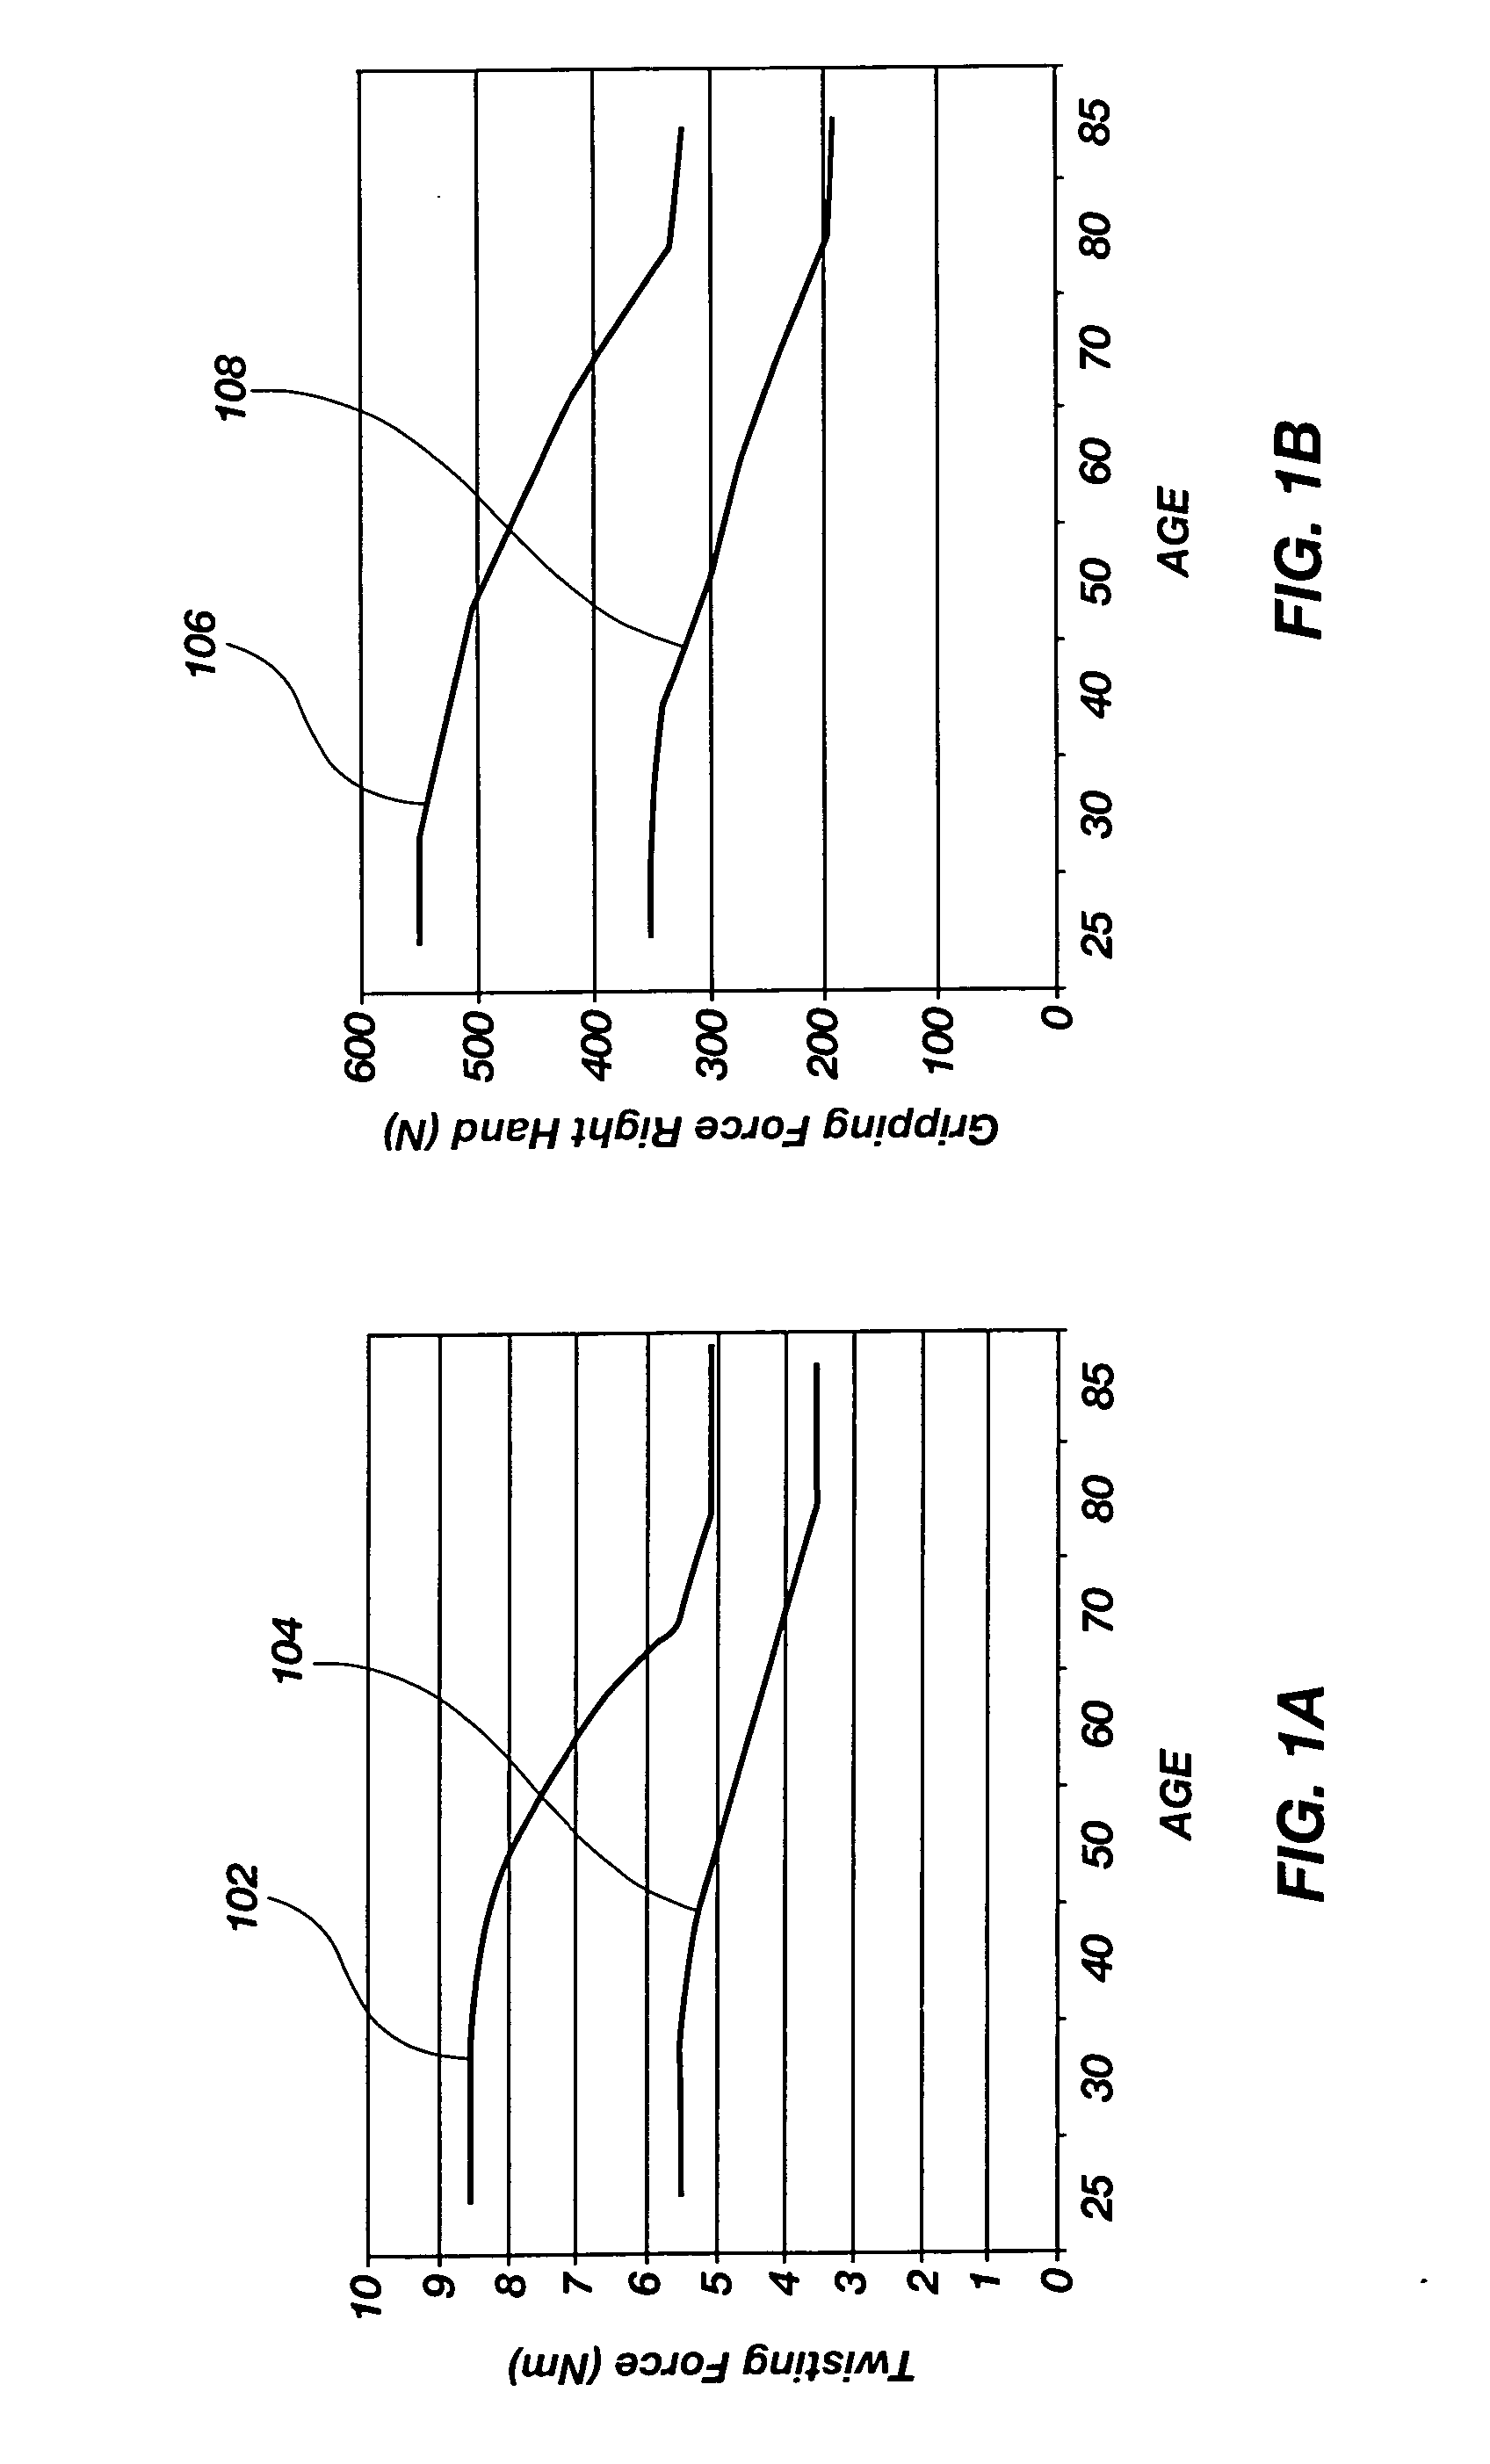 Methods of administering therapeutic injections